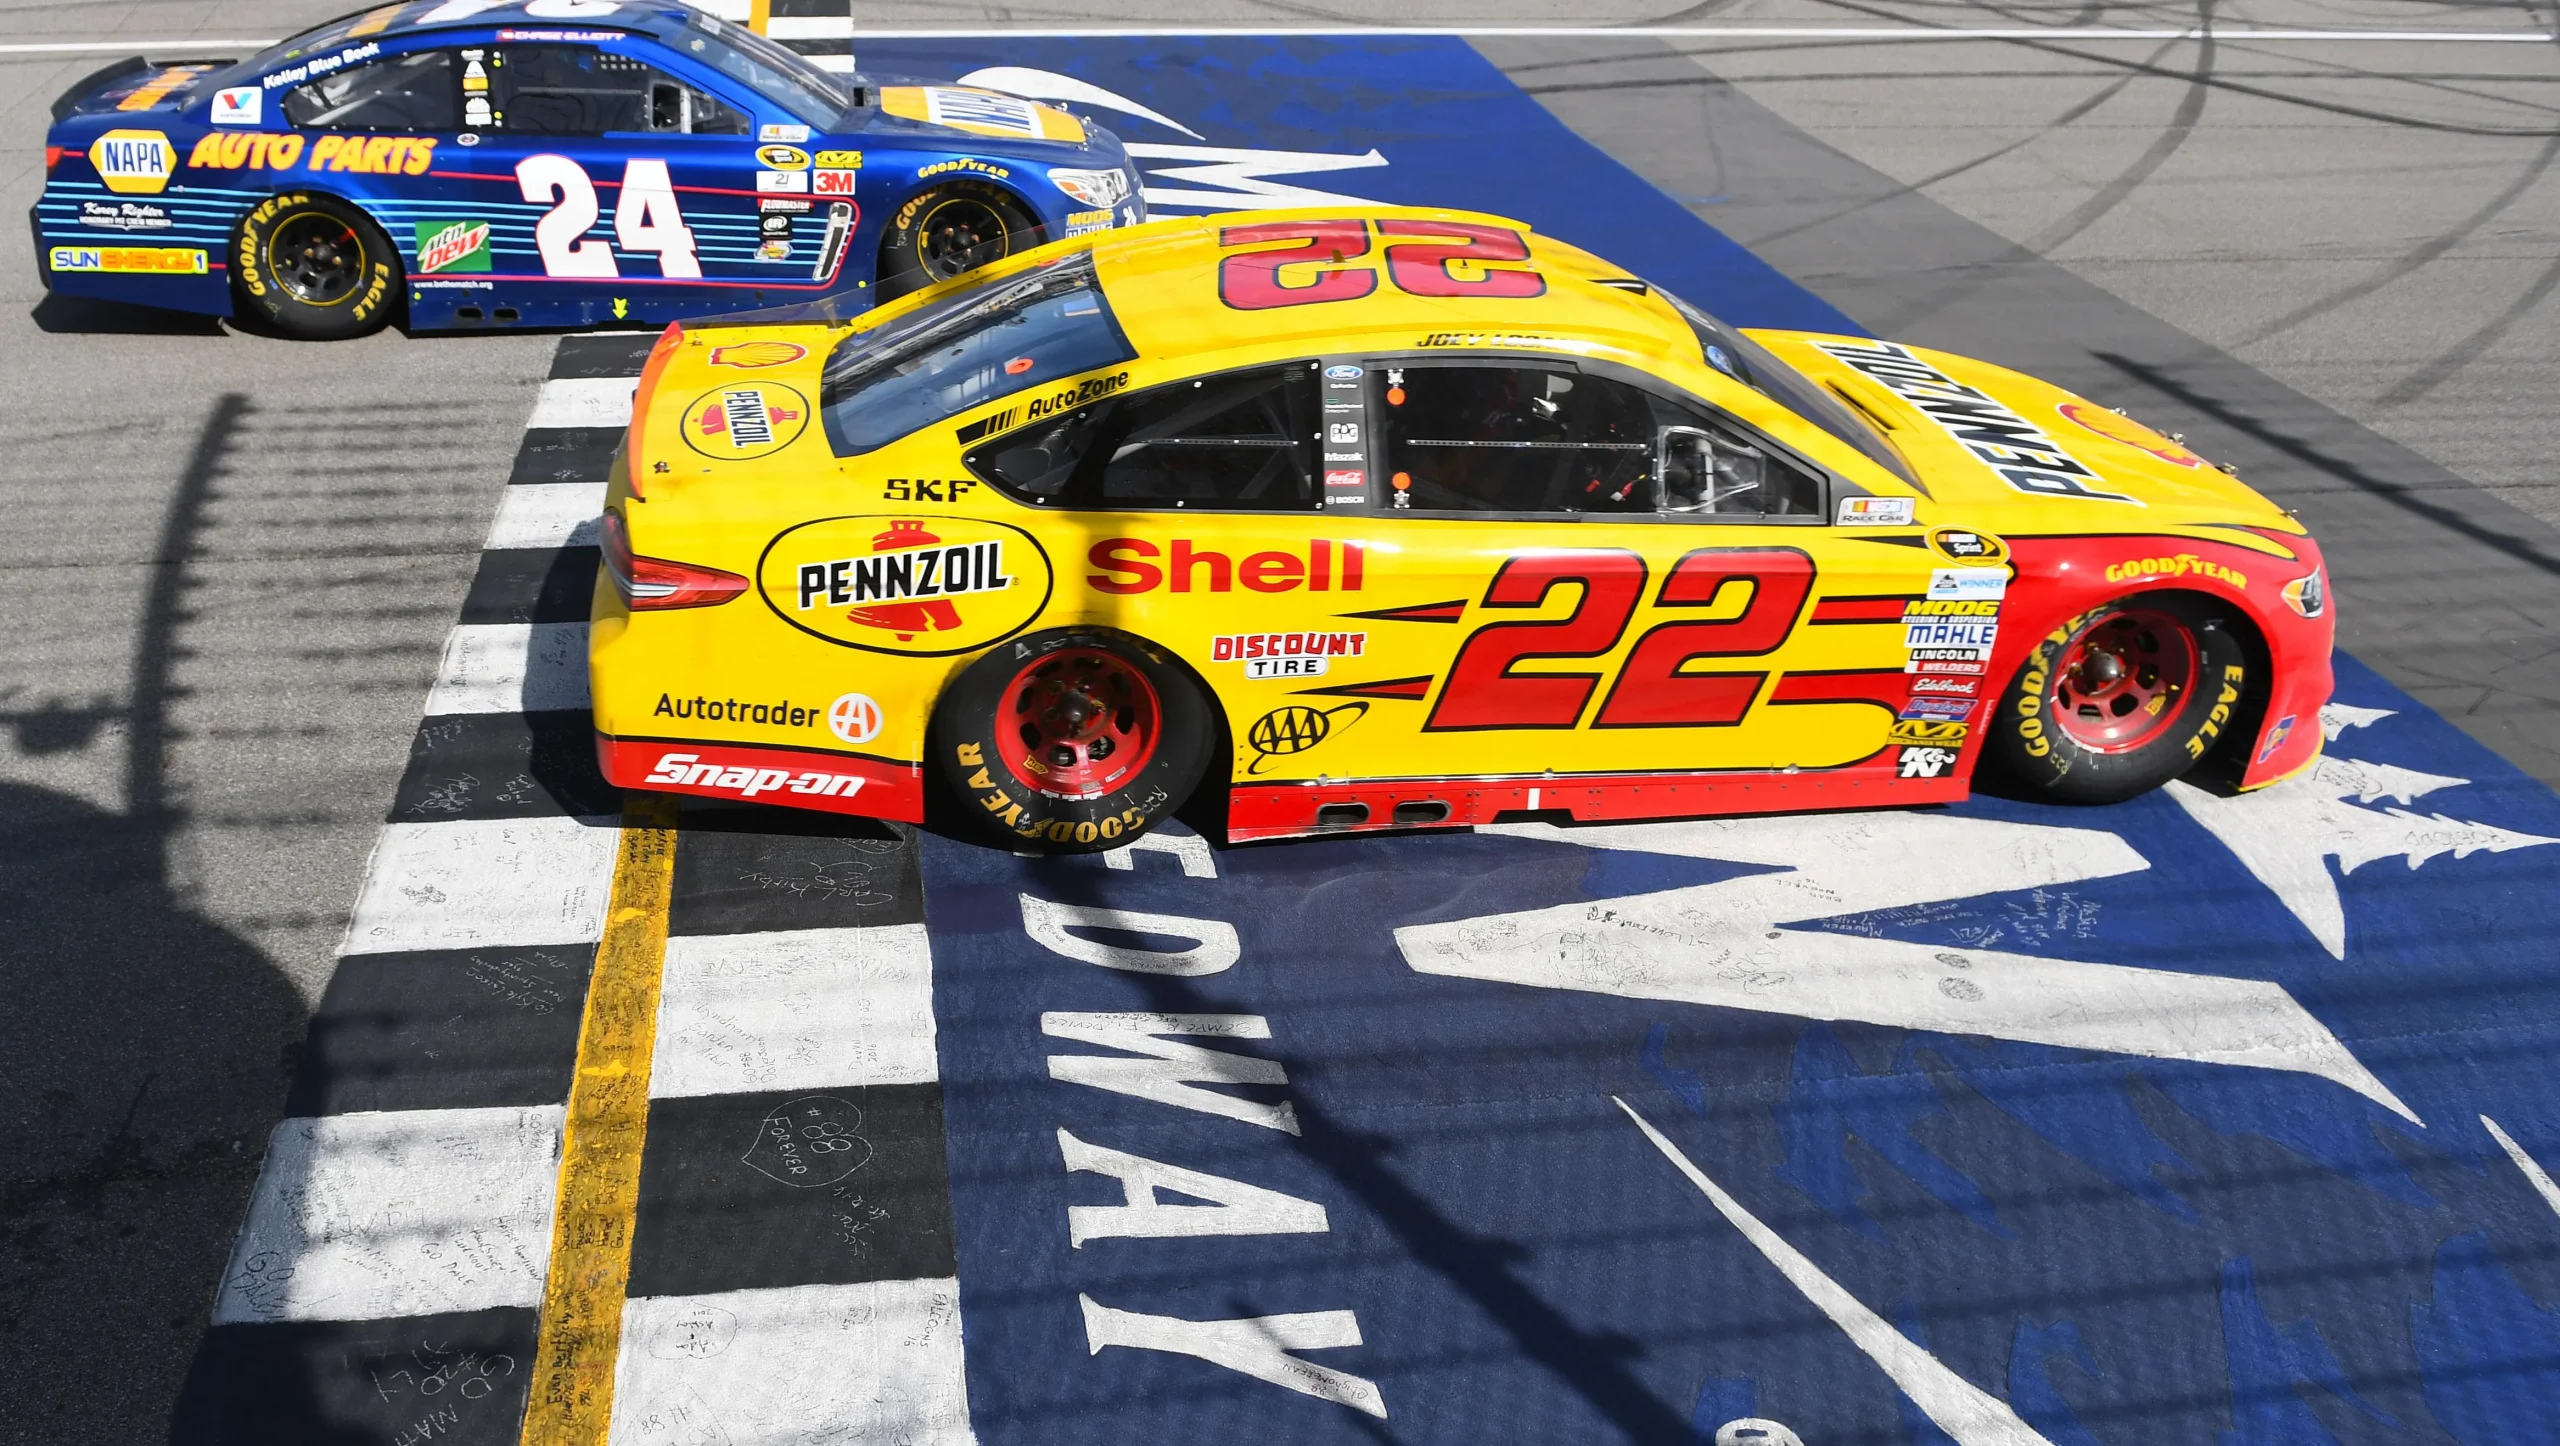 Challenge to the title Joey Logano wins the Phoenix pole in an all-Penske front row